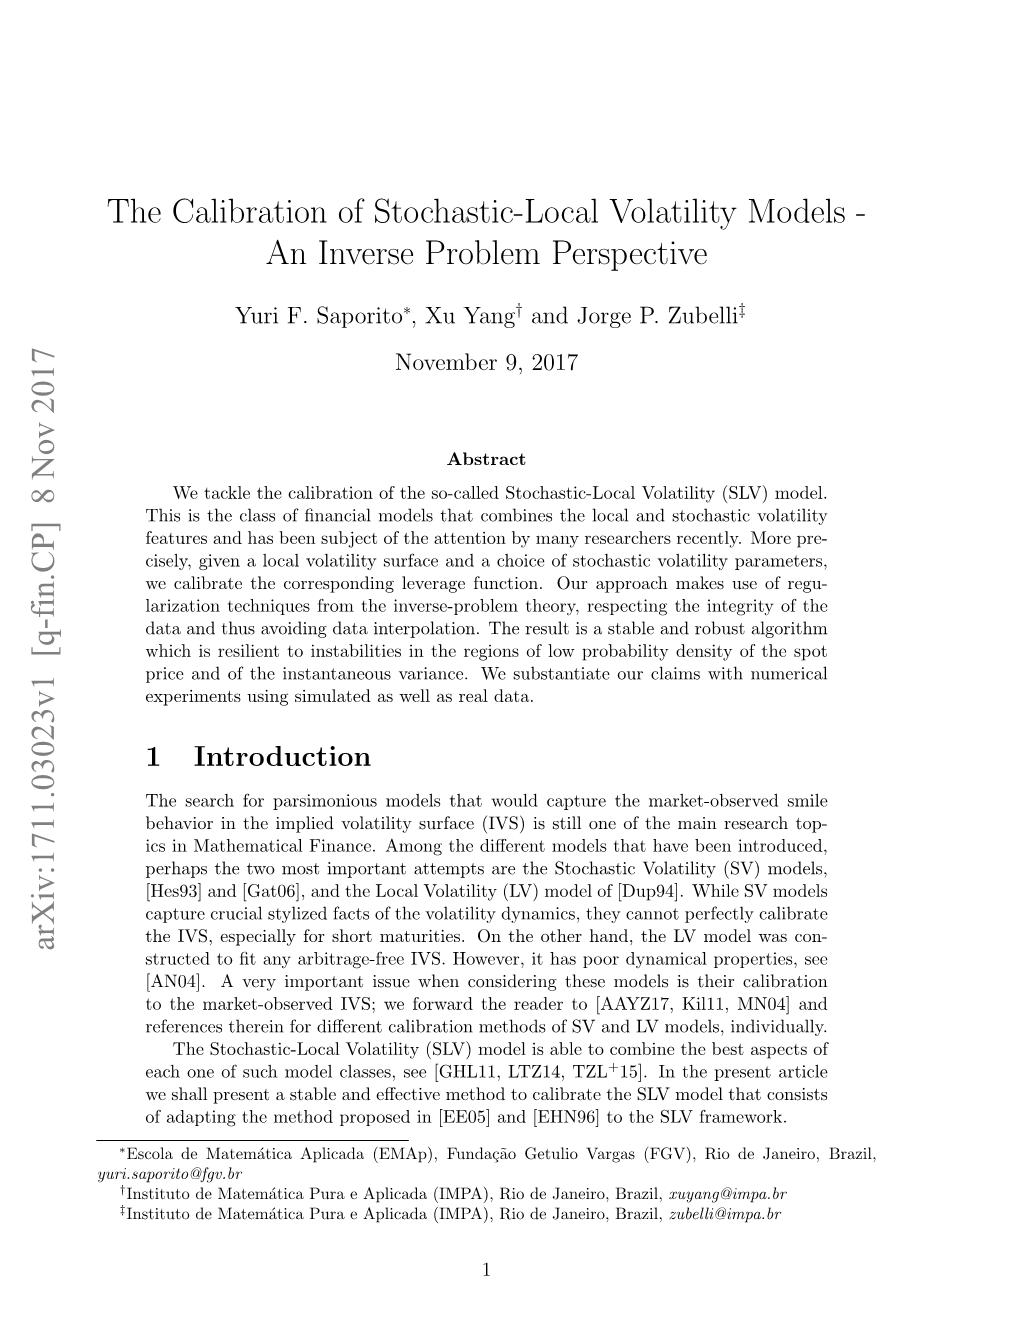 The Calibration of Stochastic-Local Volatility Models - an Inverse Problem Perspective